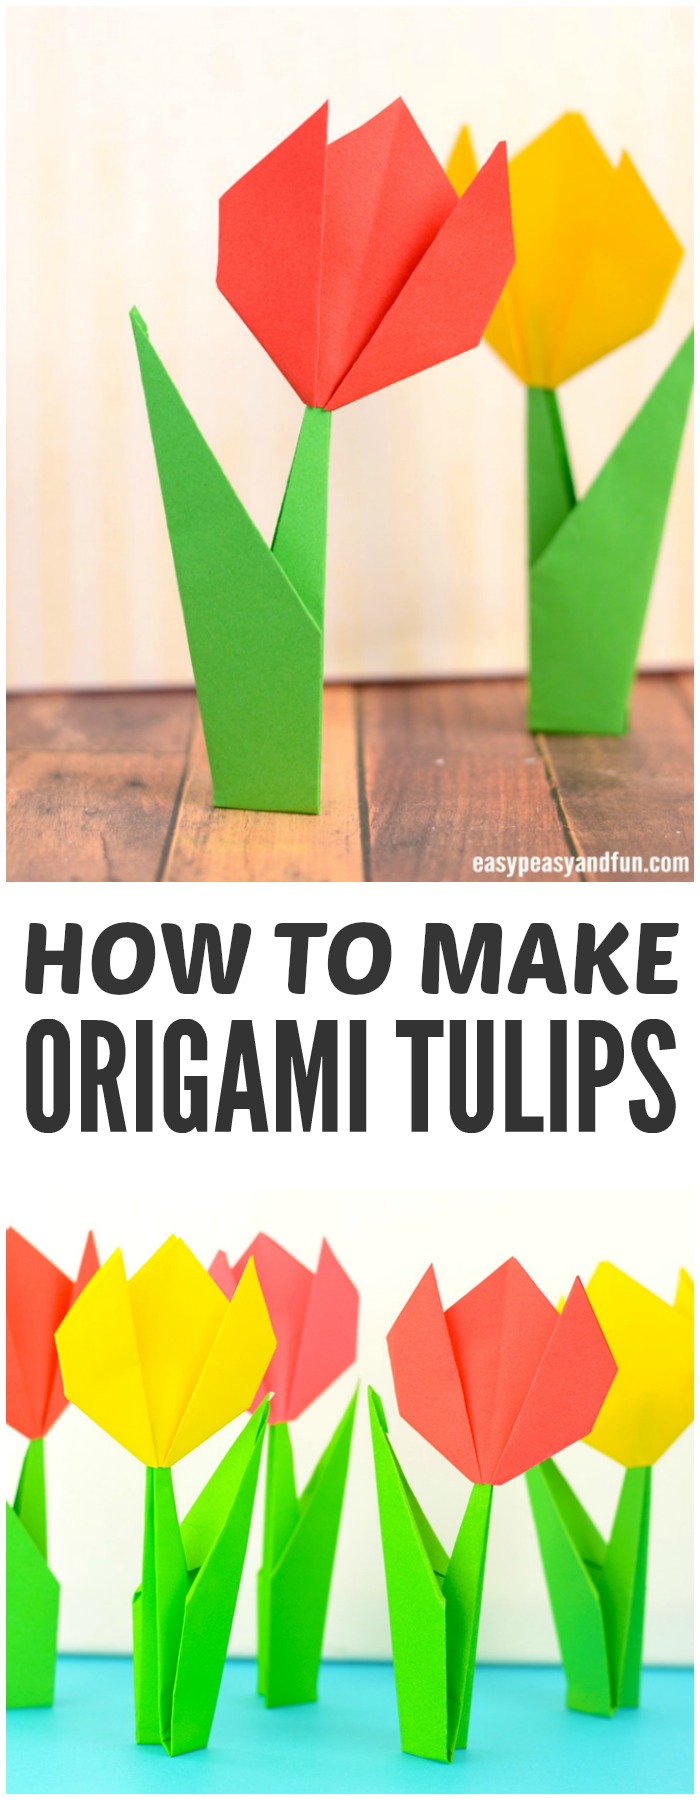 How to make origami flowers.  Step by step tutorial on origami tulips.